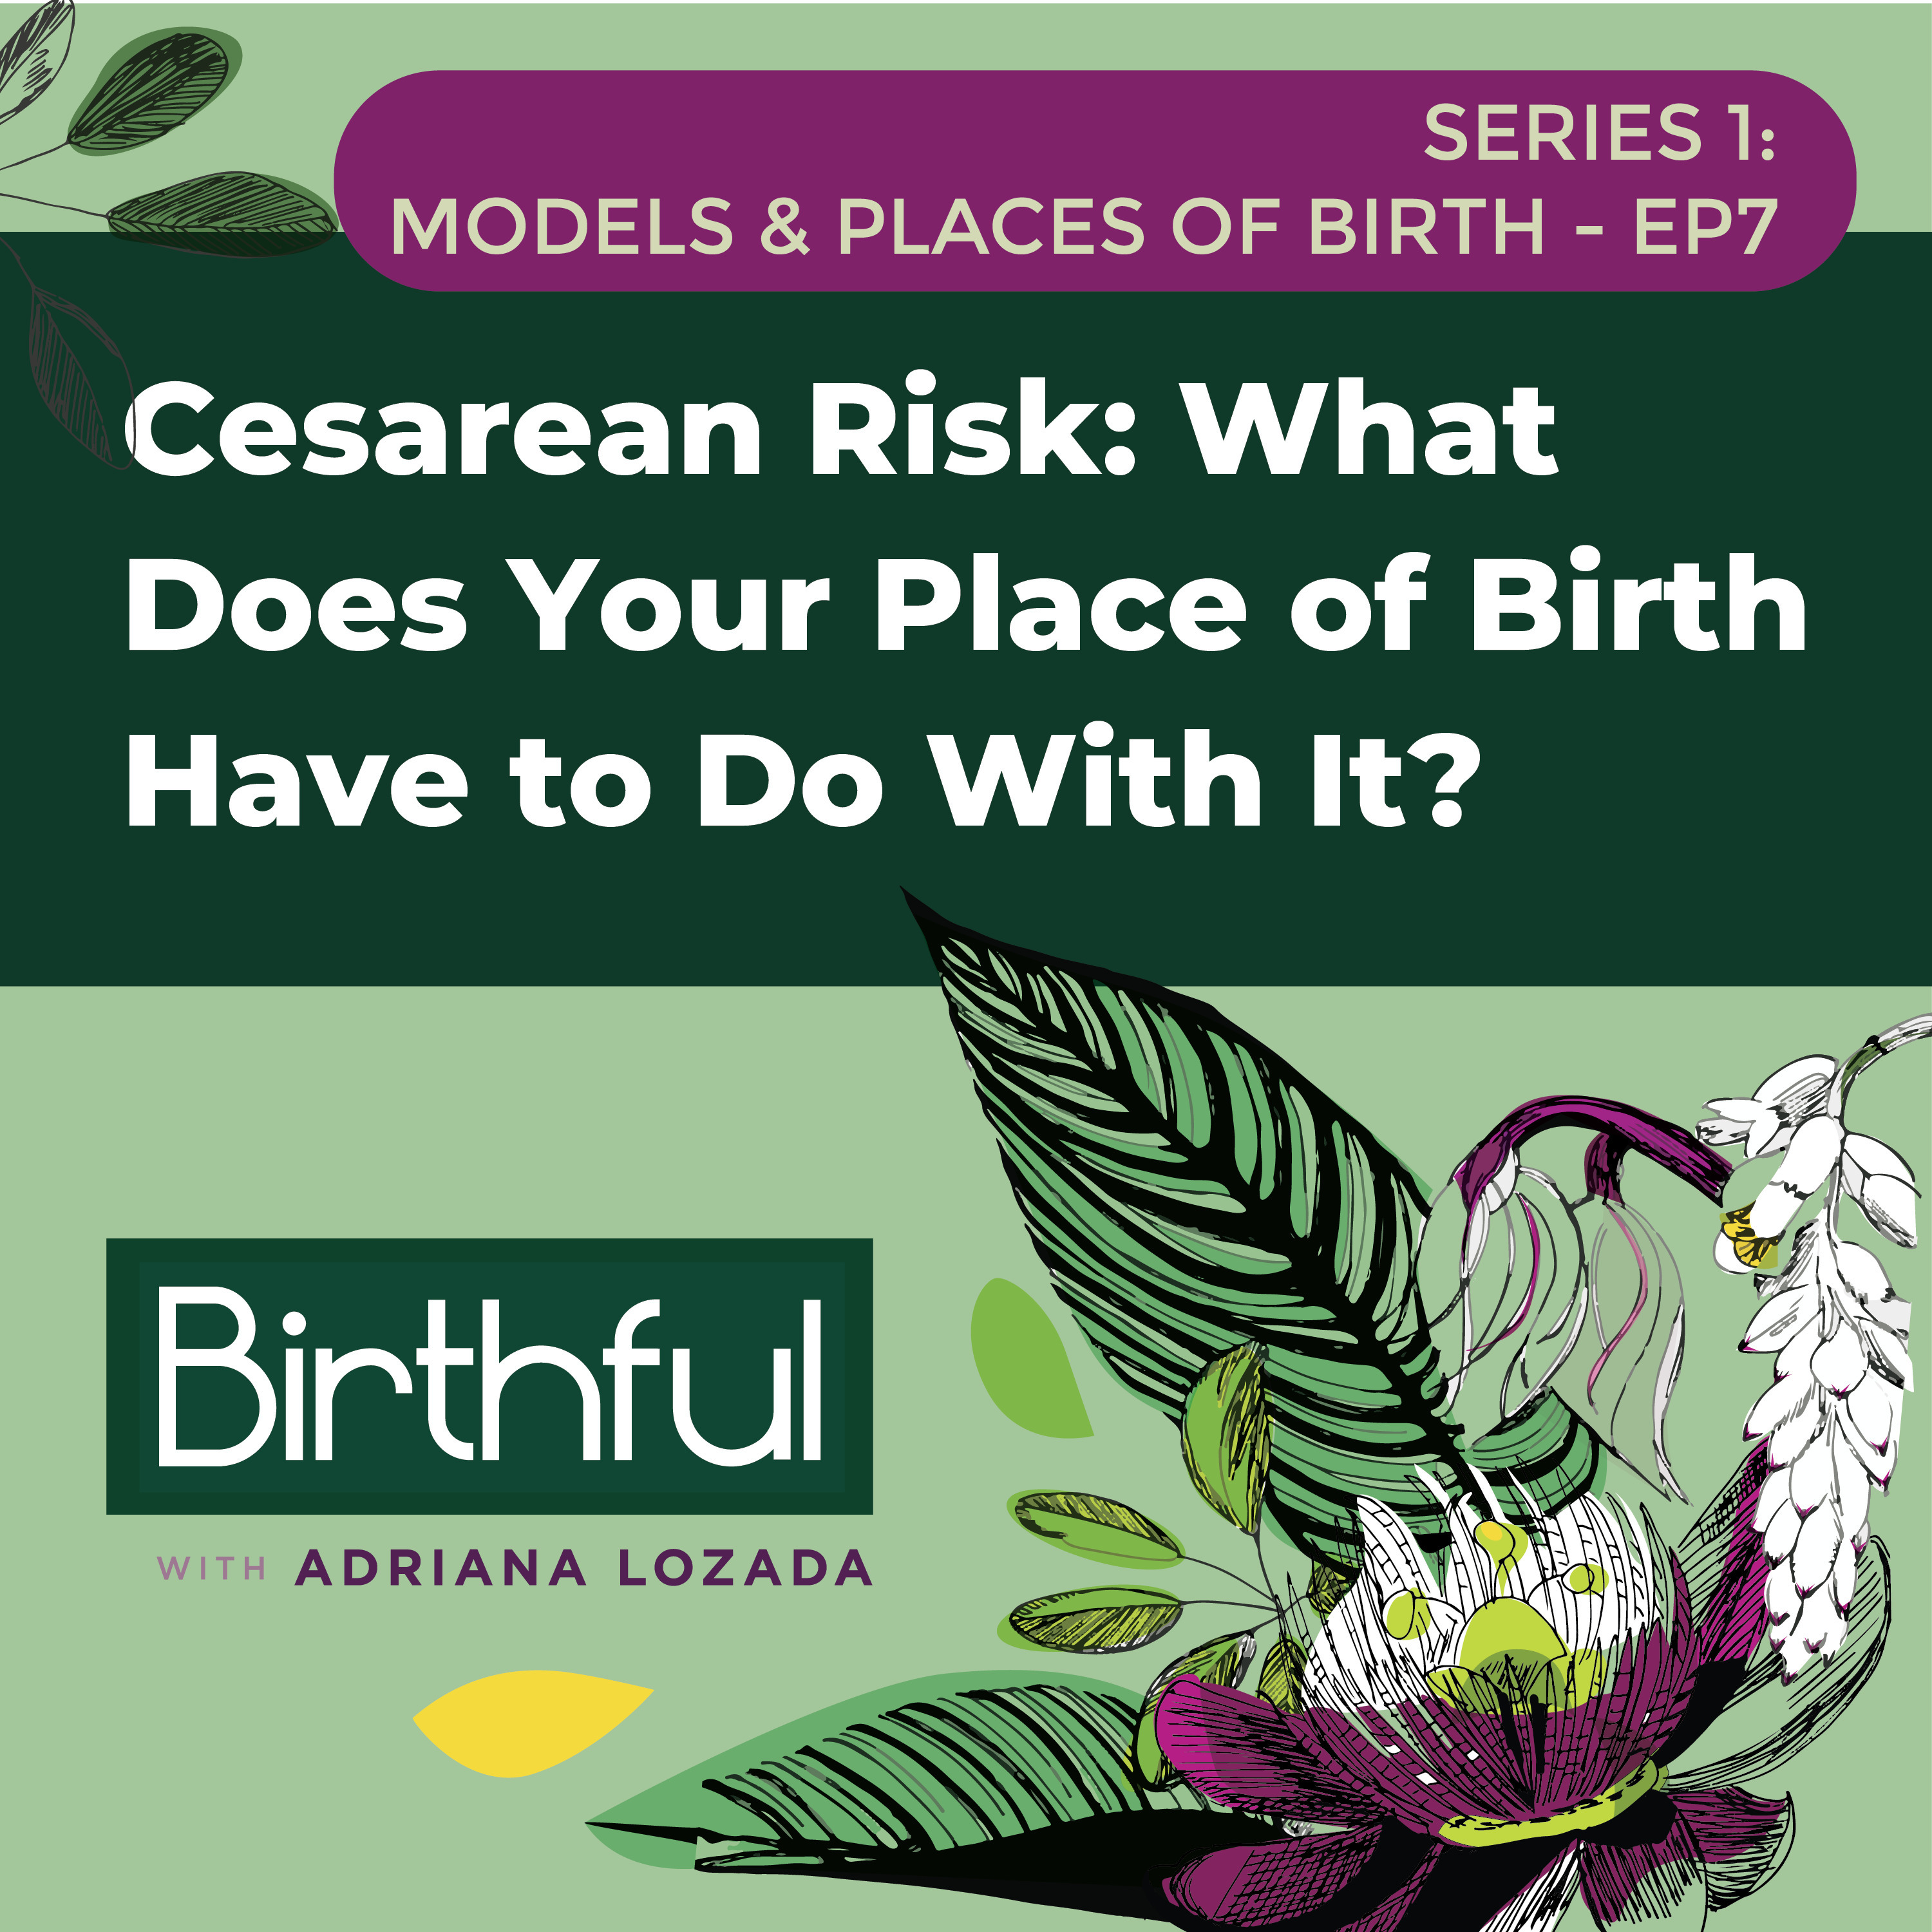 Cesarean Risk: What’s Your Place of Birth Got to Do With It?